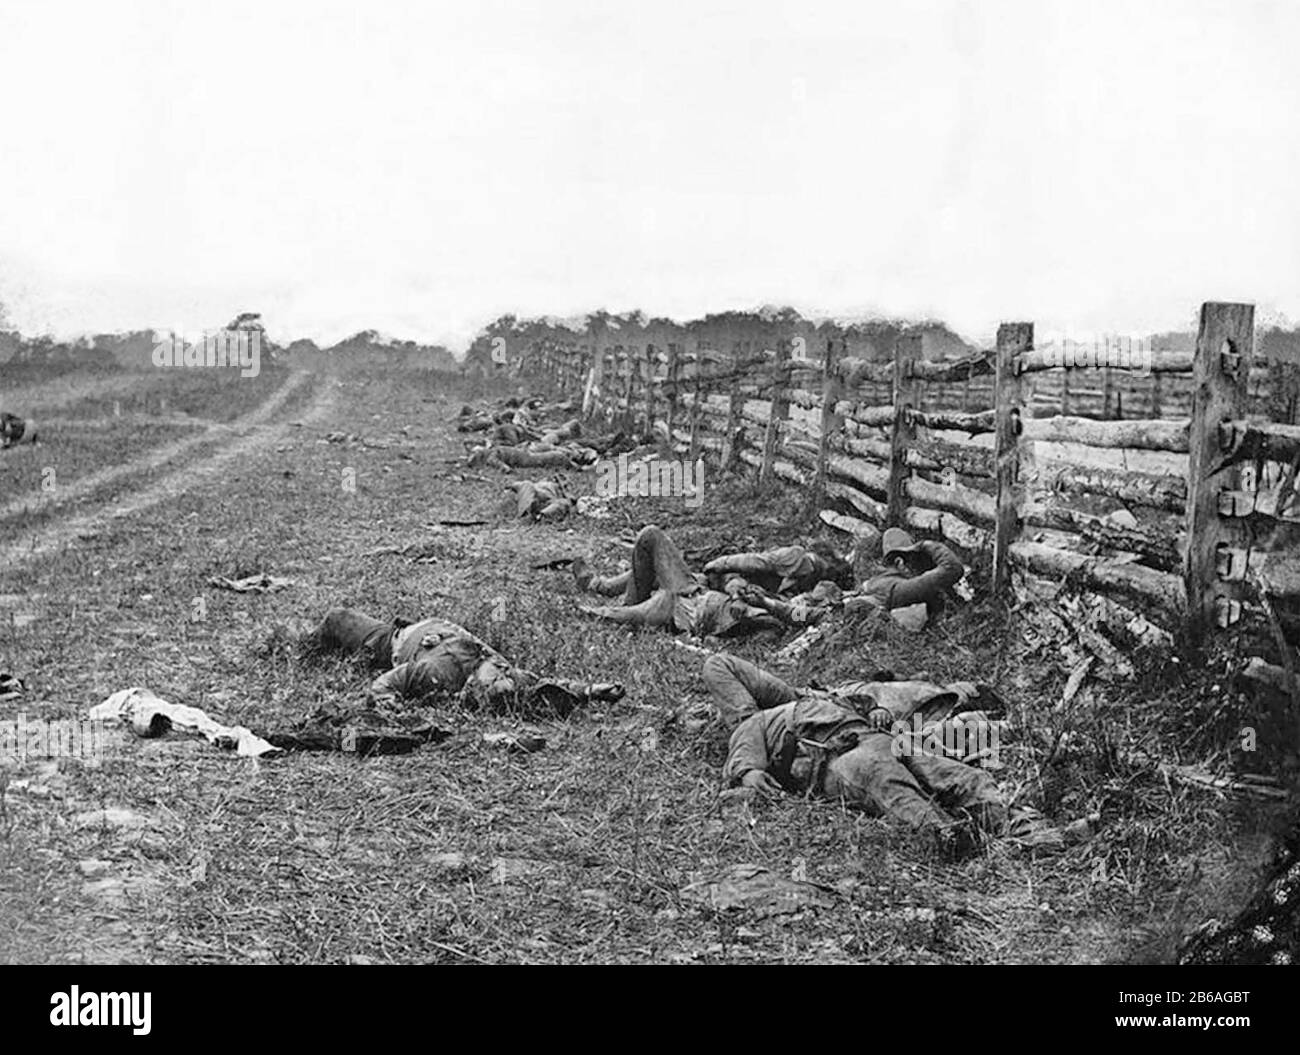 BATTLE OF ANTIETAM 17 September 1862 near Sharpsburg, Maryland. Confederate dead from Starke's Louisiana Brigade on the Hagerstown Turnpike to the right of the fence north of the Dunker Church. Photo: Alexander Gardner Stock Photo